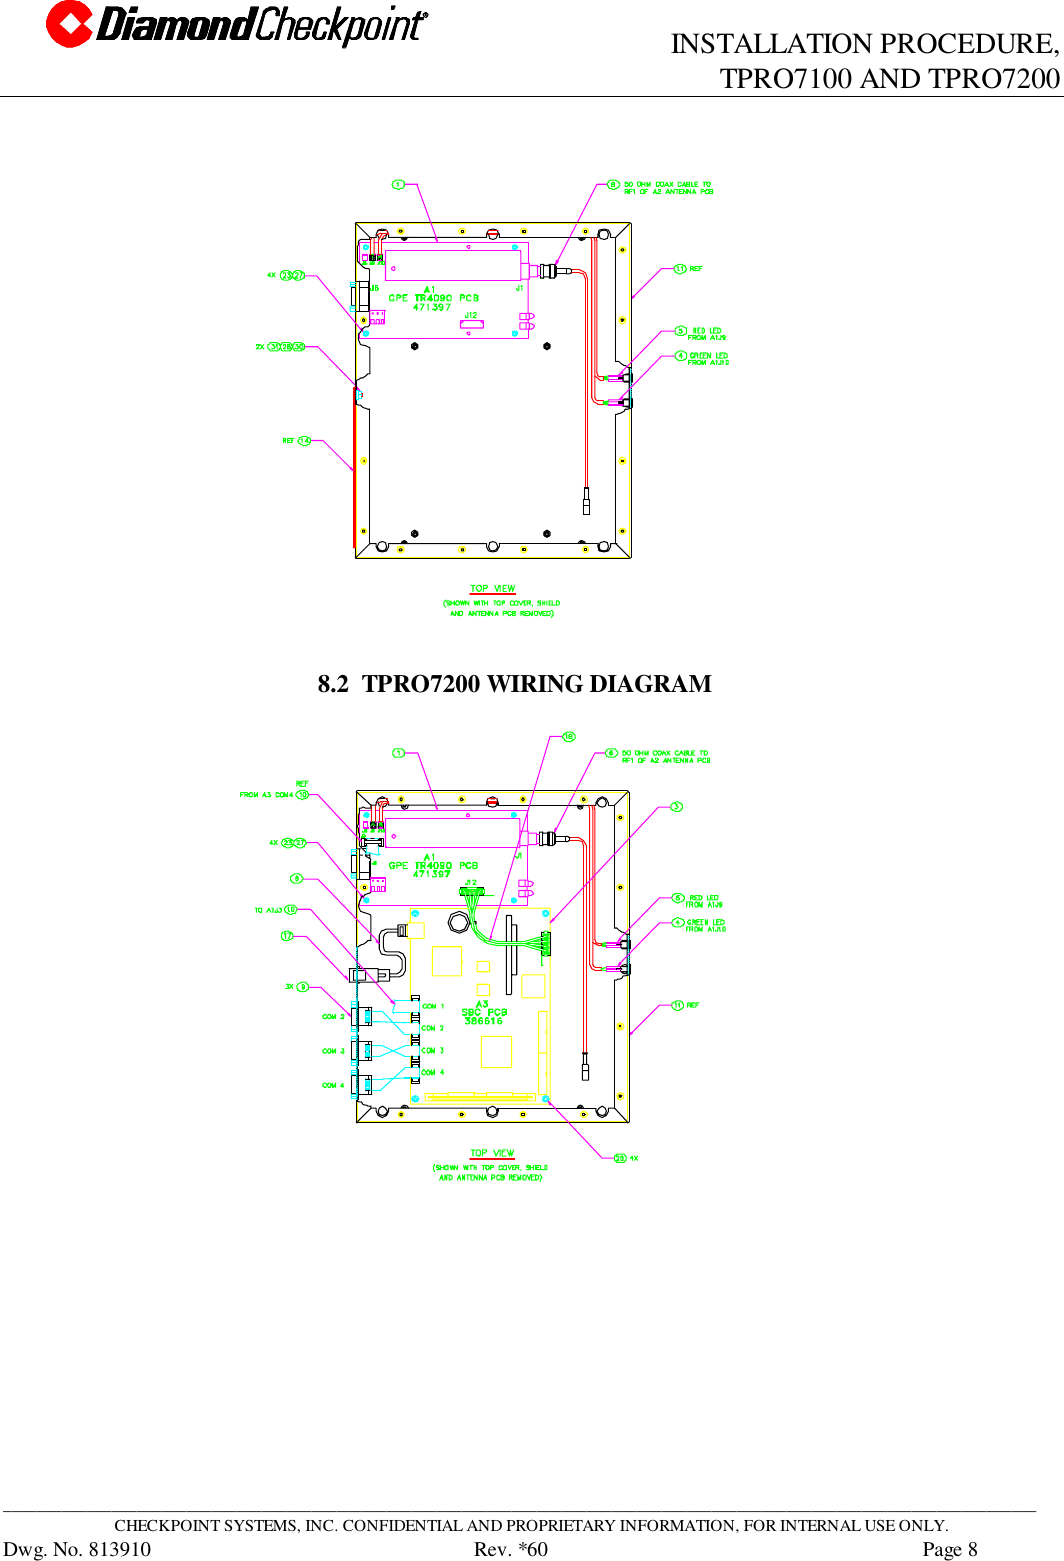                            INSTALLATION PROCEDURE,TPRO7100 AND TPRO7200____________________________________________________________________________________________________________________________CHECKPOINT SYSTEMS, INC. CONFIDENTIAL AND PROPRIETARY INFORMATION, FOR INTERNAL USE ONLY.Dwg. No. 813910      Rev. *60 Page 88.2  TPRO7200 WIRING DIAGRAM